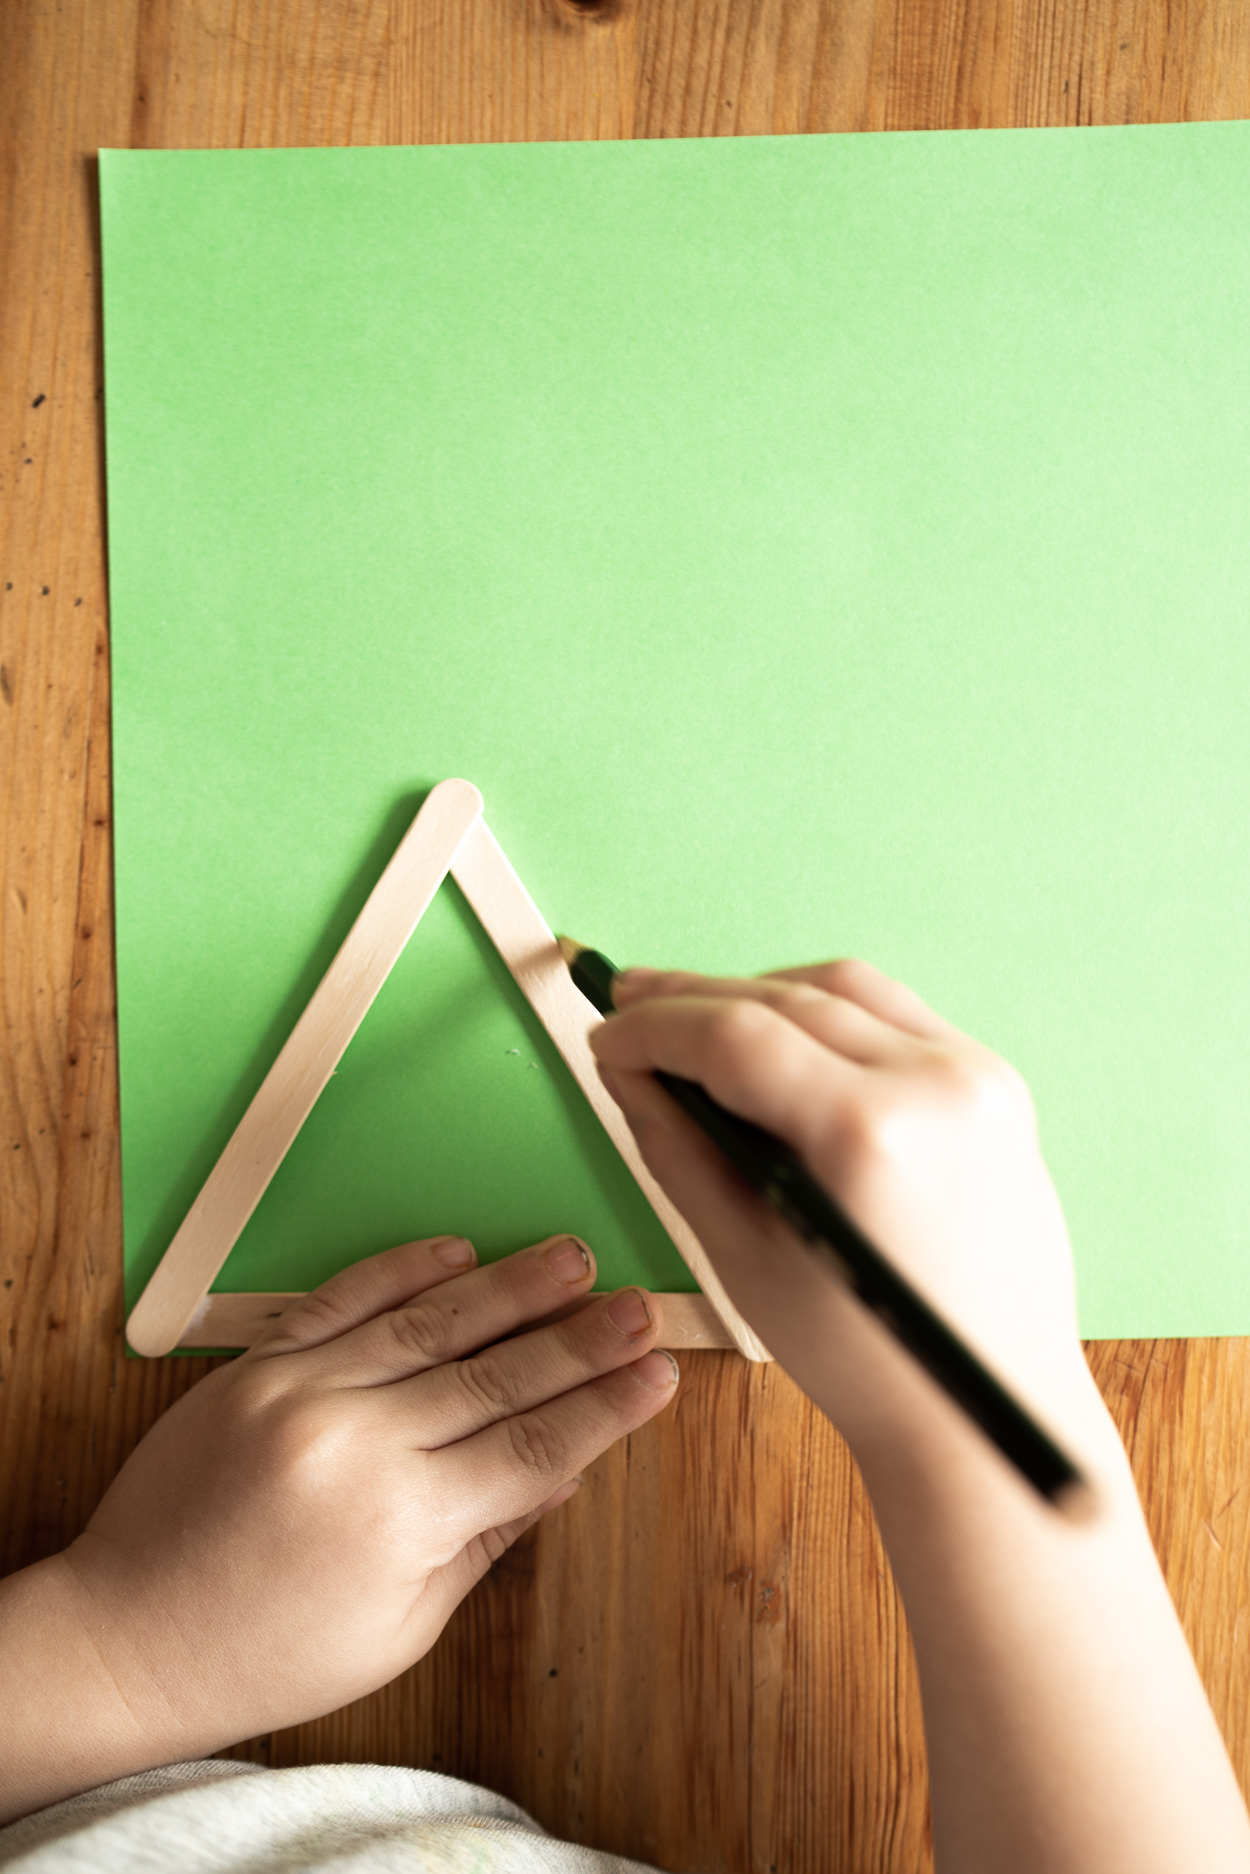 Put your triangle on colored paper and trace it